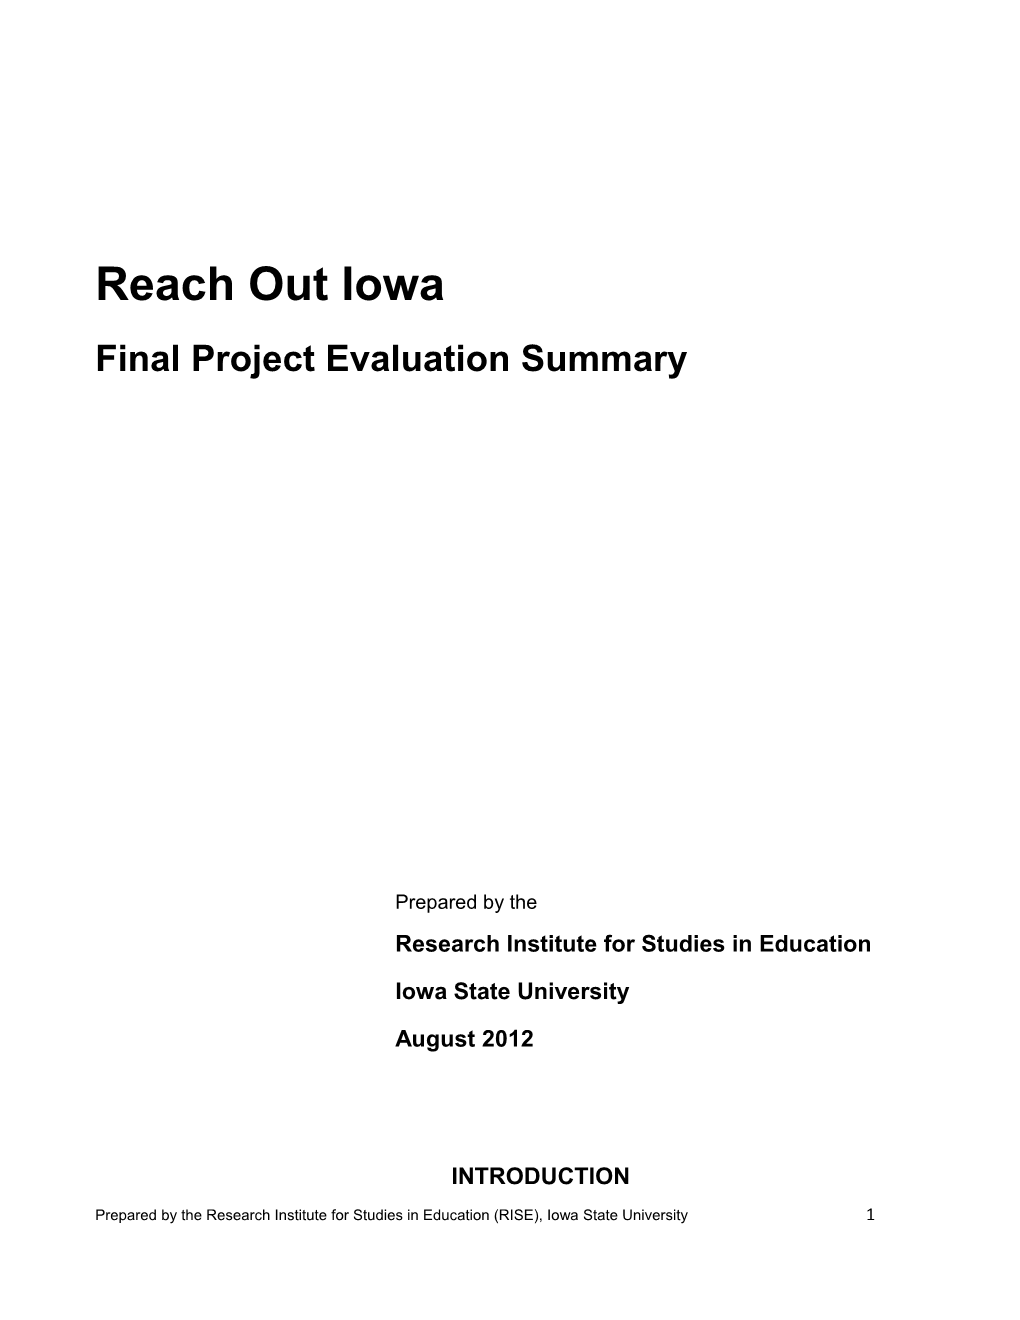 Final Project Evaluation Summary